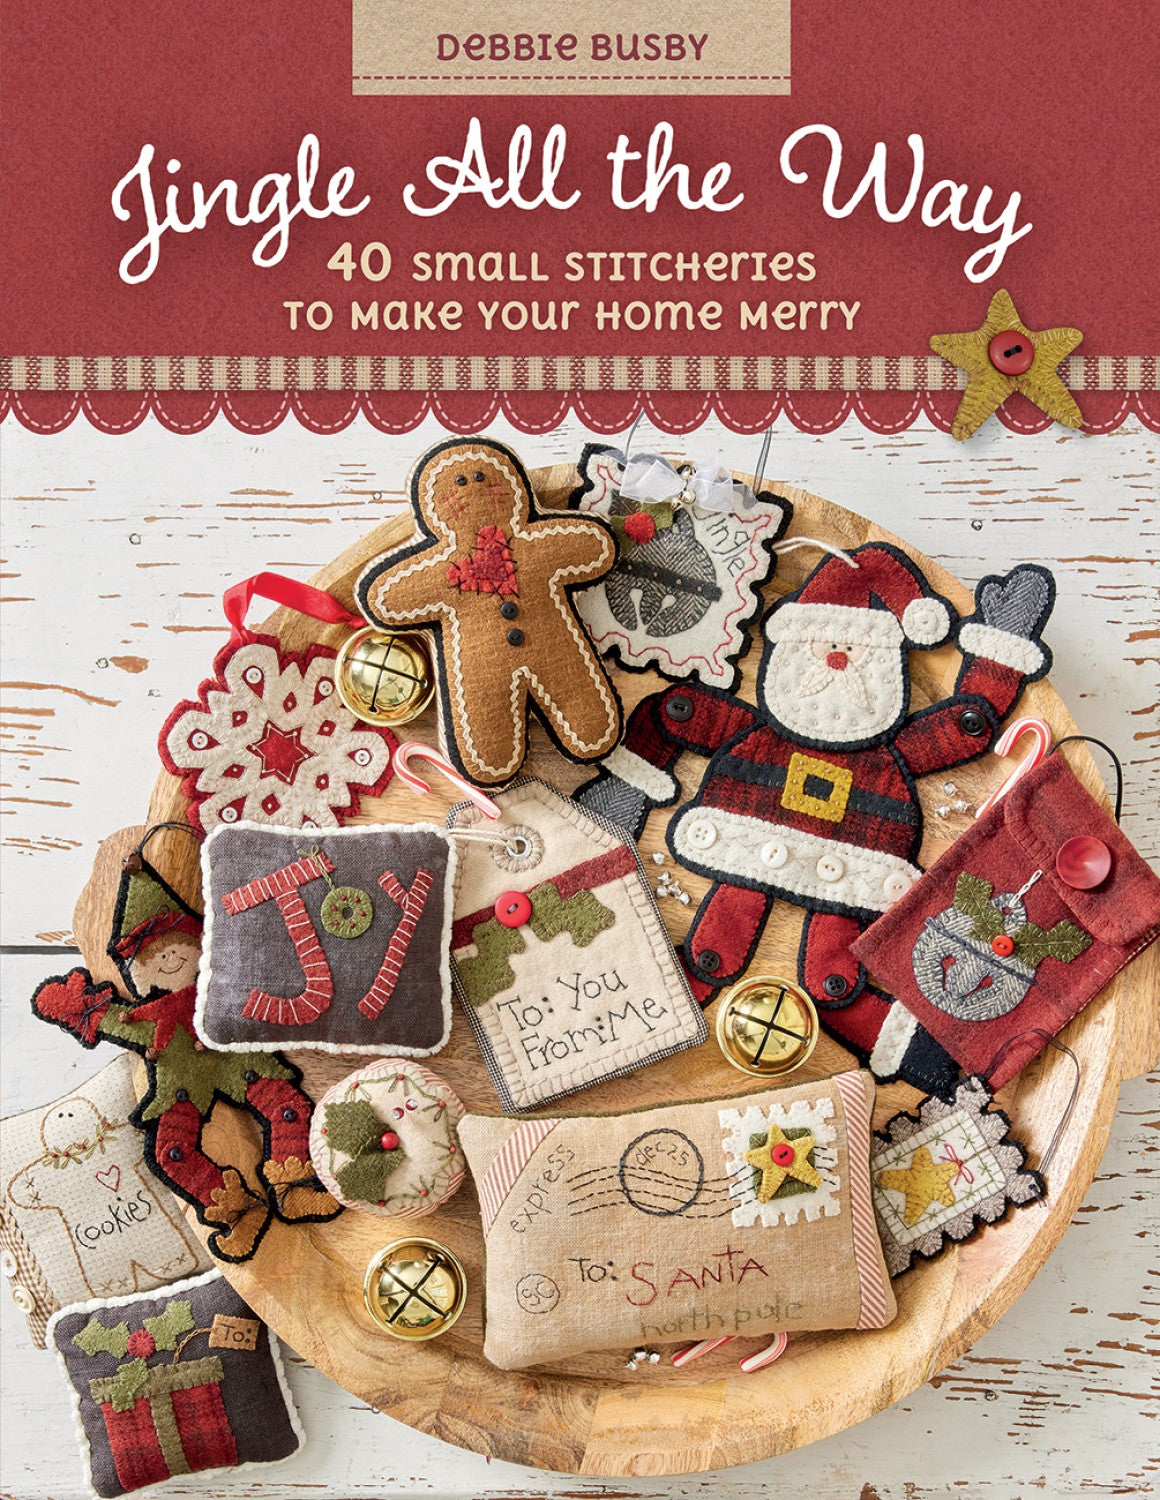 Jingle all the way by Debbie Busby